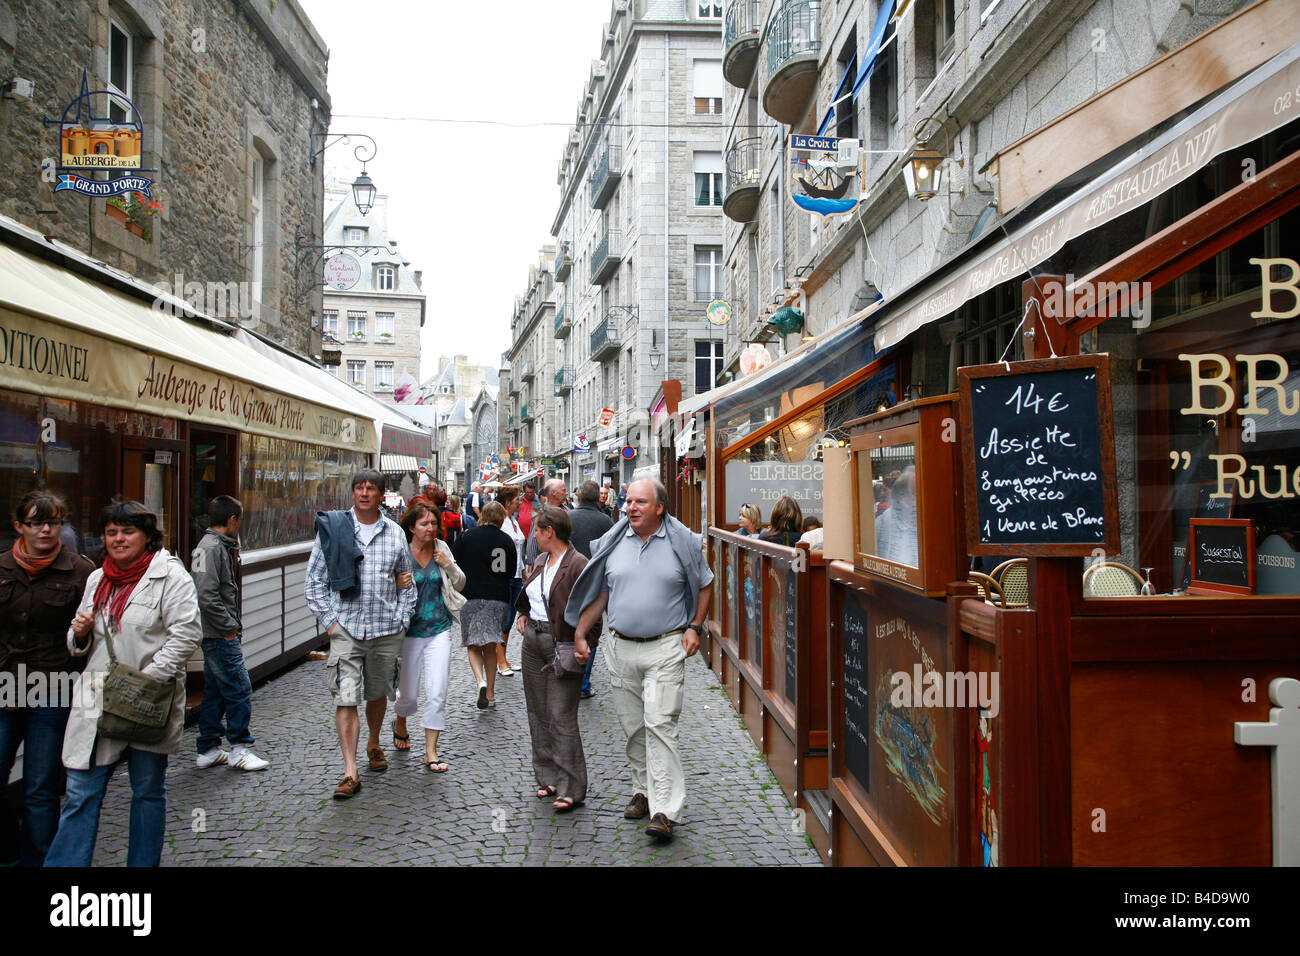 July 2008 - People at the old town of Saint Malo Brittany France Stock Photo